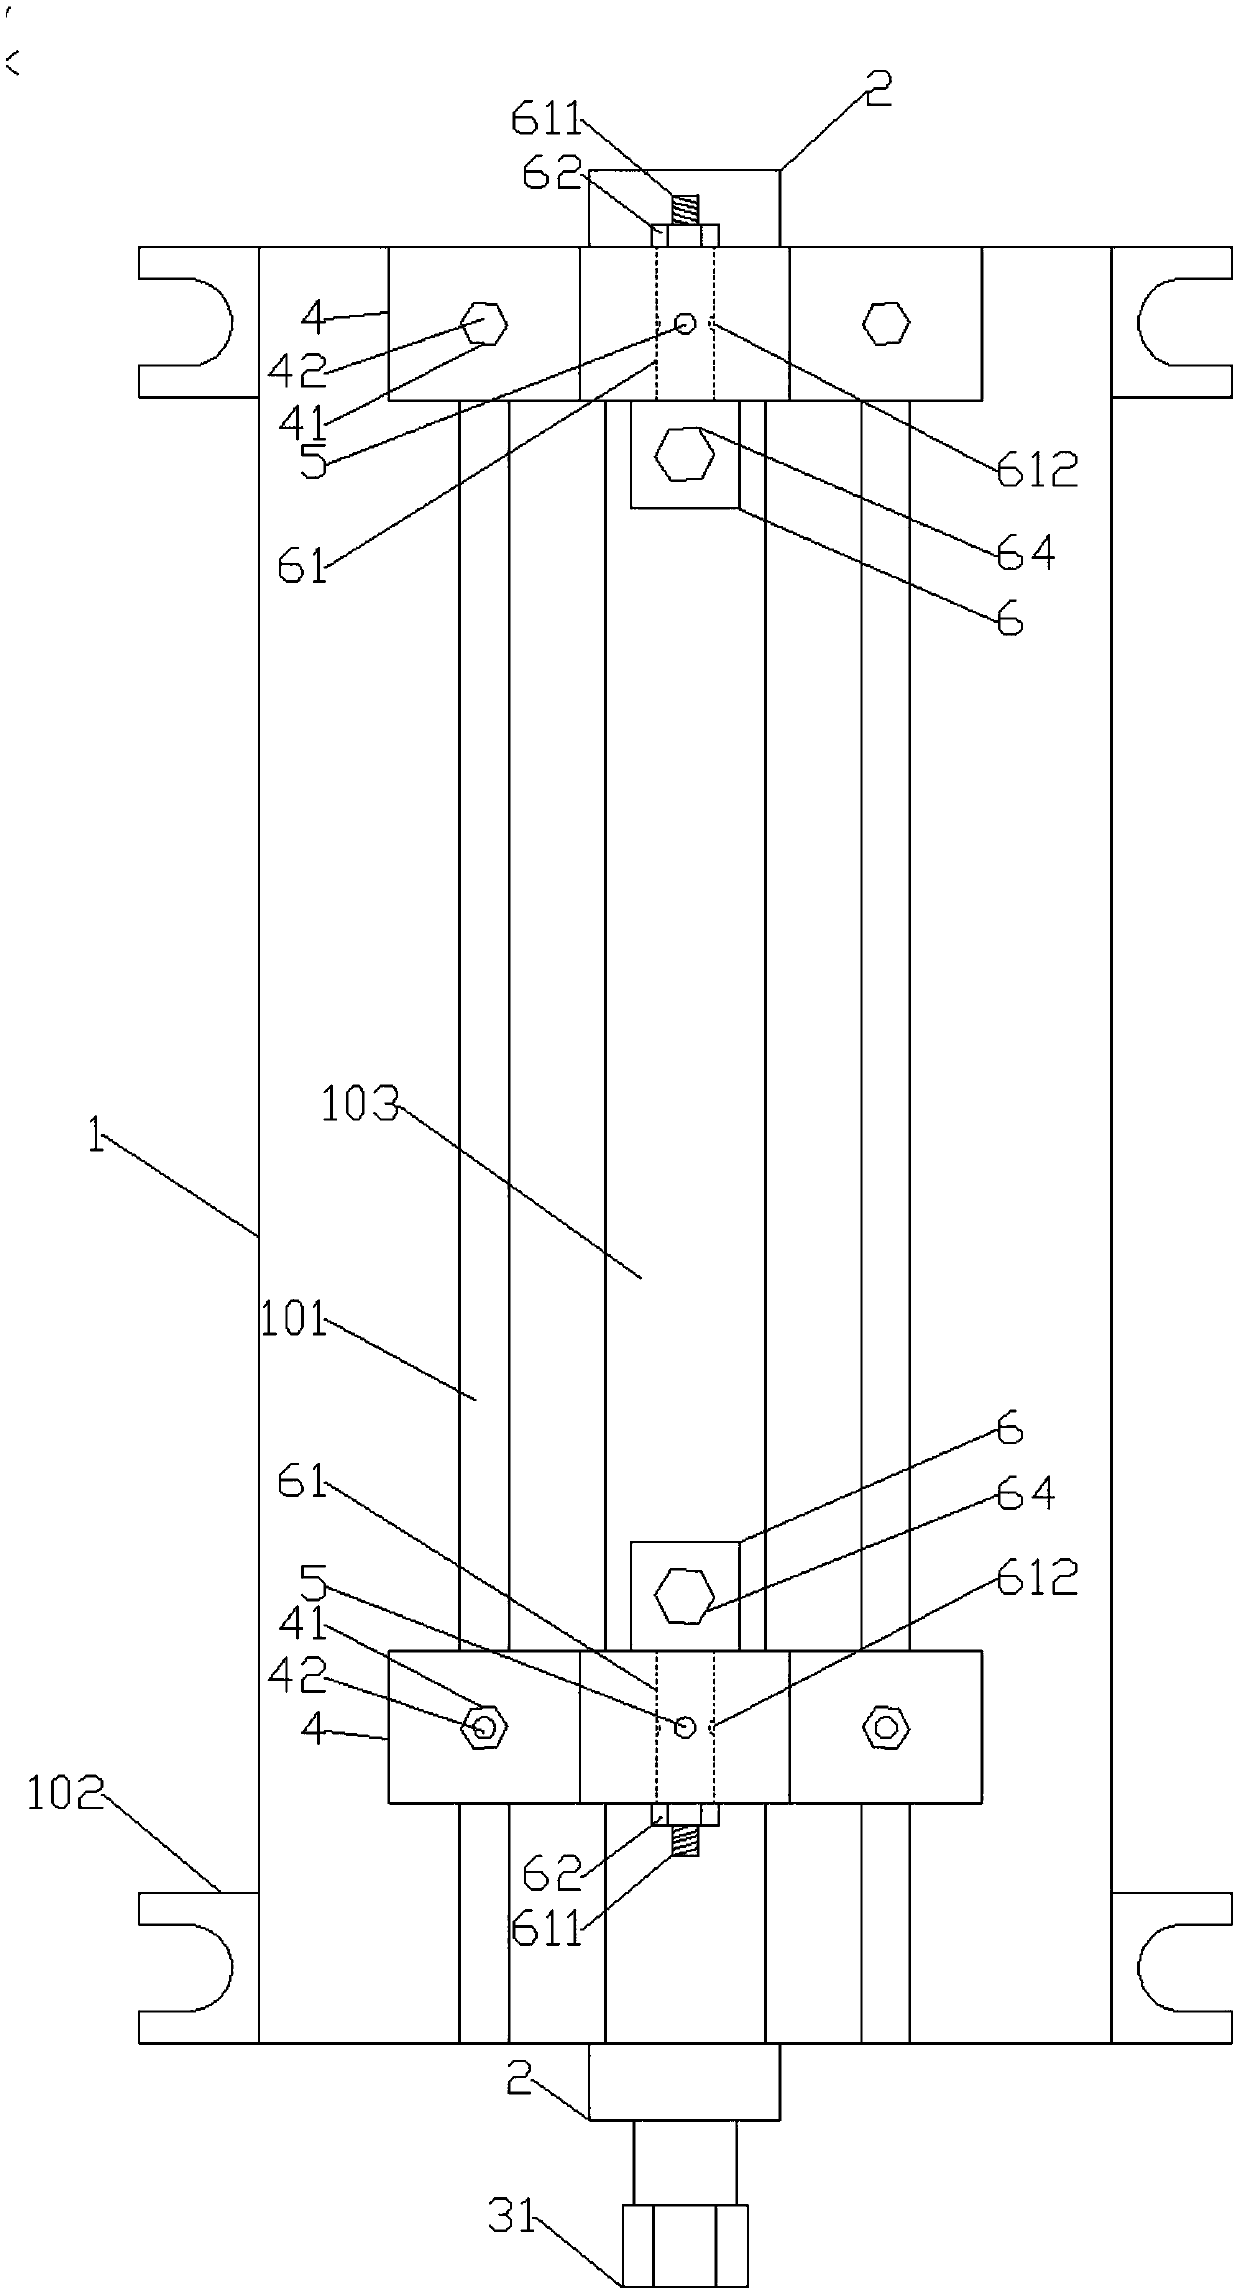 A multi-angle processing jig for bone plate